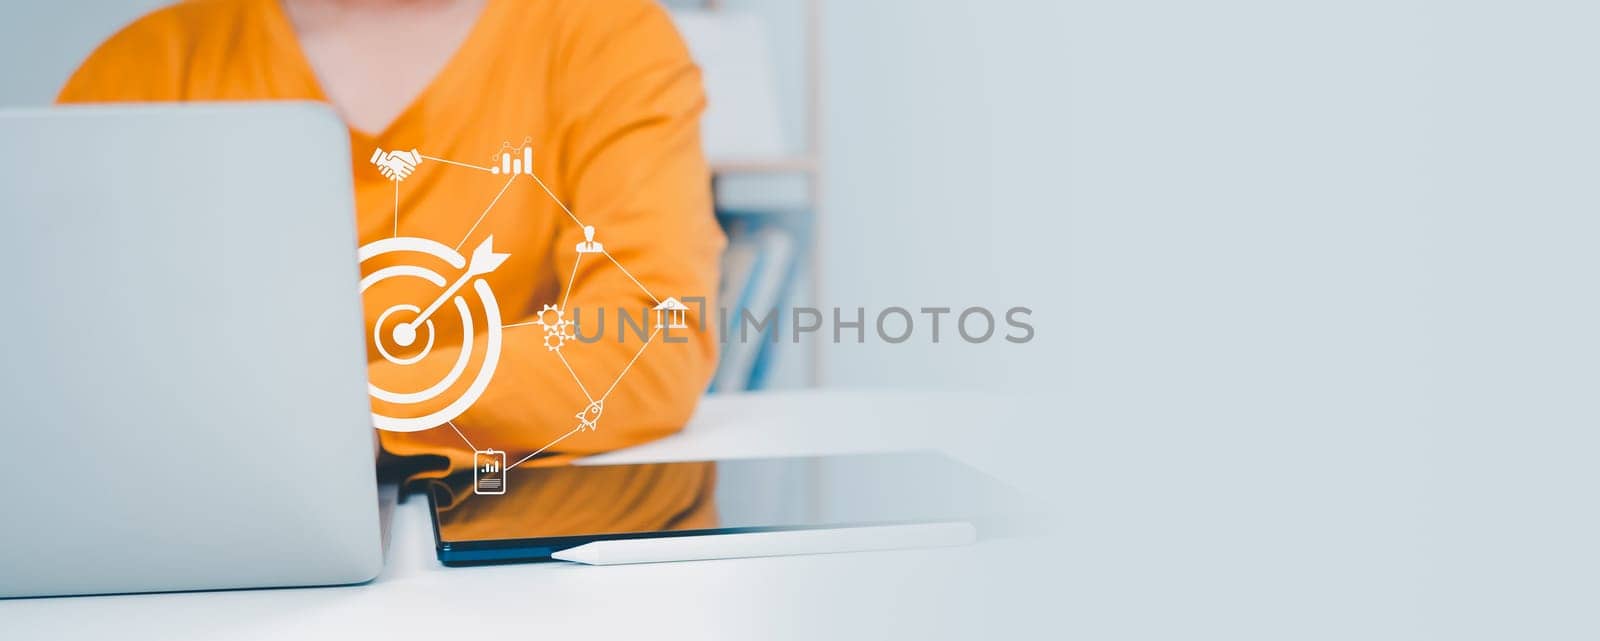 Business woman showing business target planning development leadership and target, investment growth and success development, strategy, finance concept, planning online business marketplace. by Unimages2527